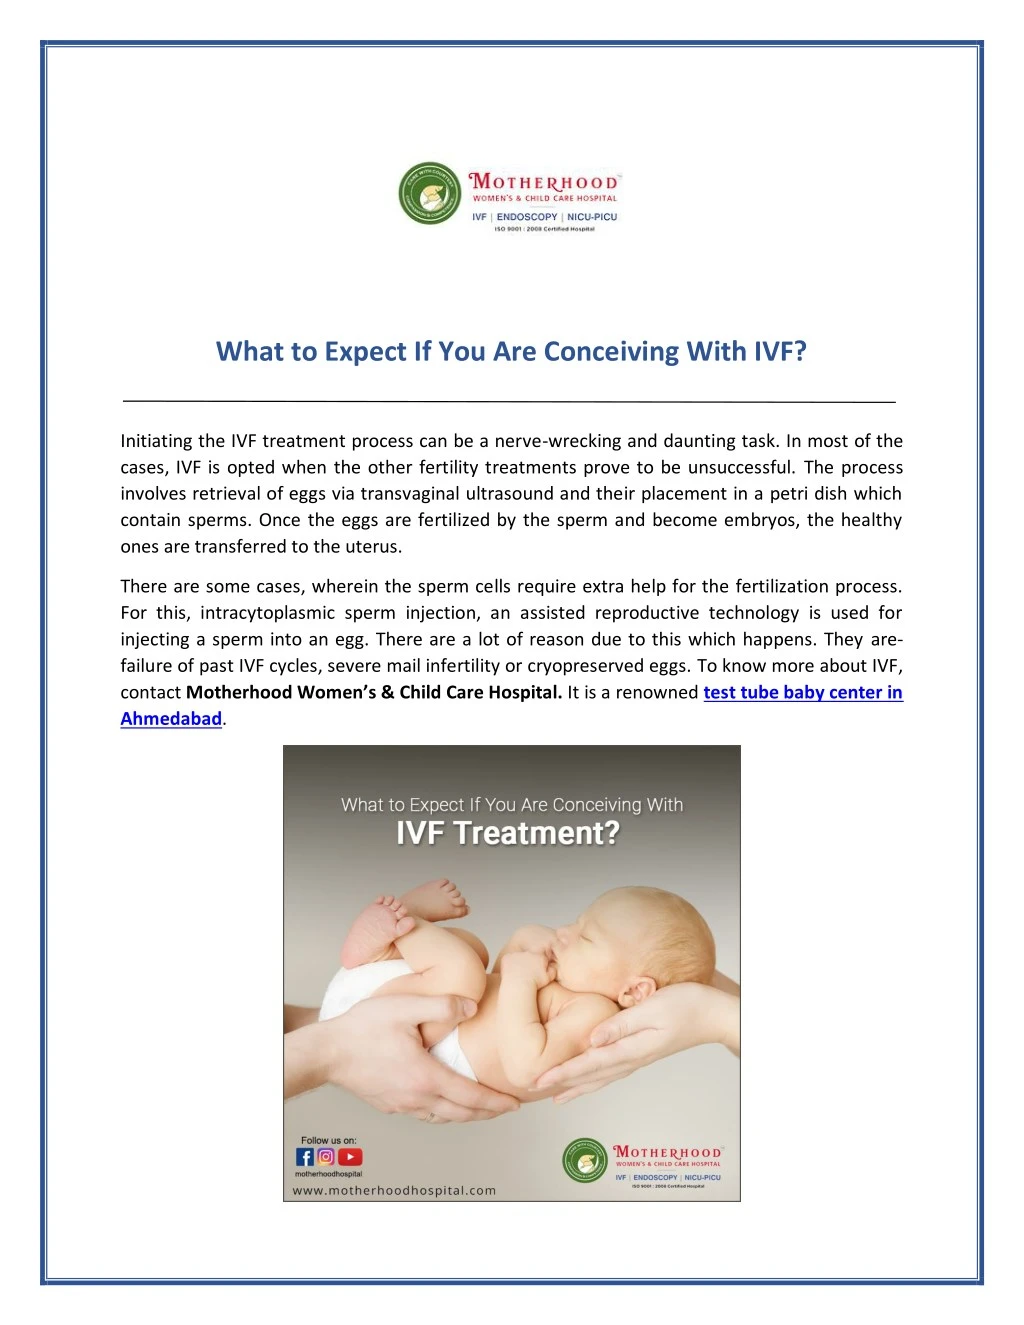 what to expect if you are conceiving with ivf